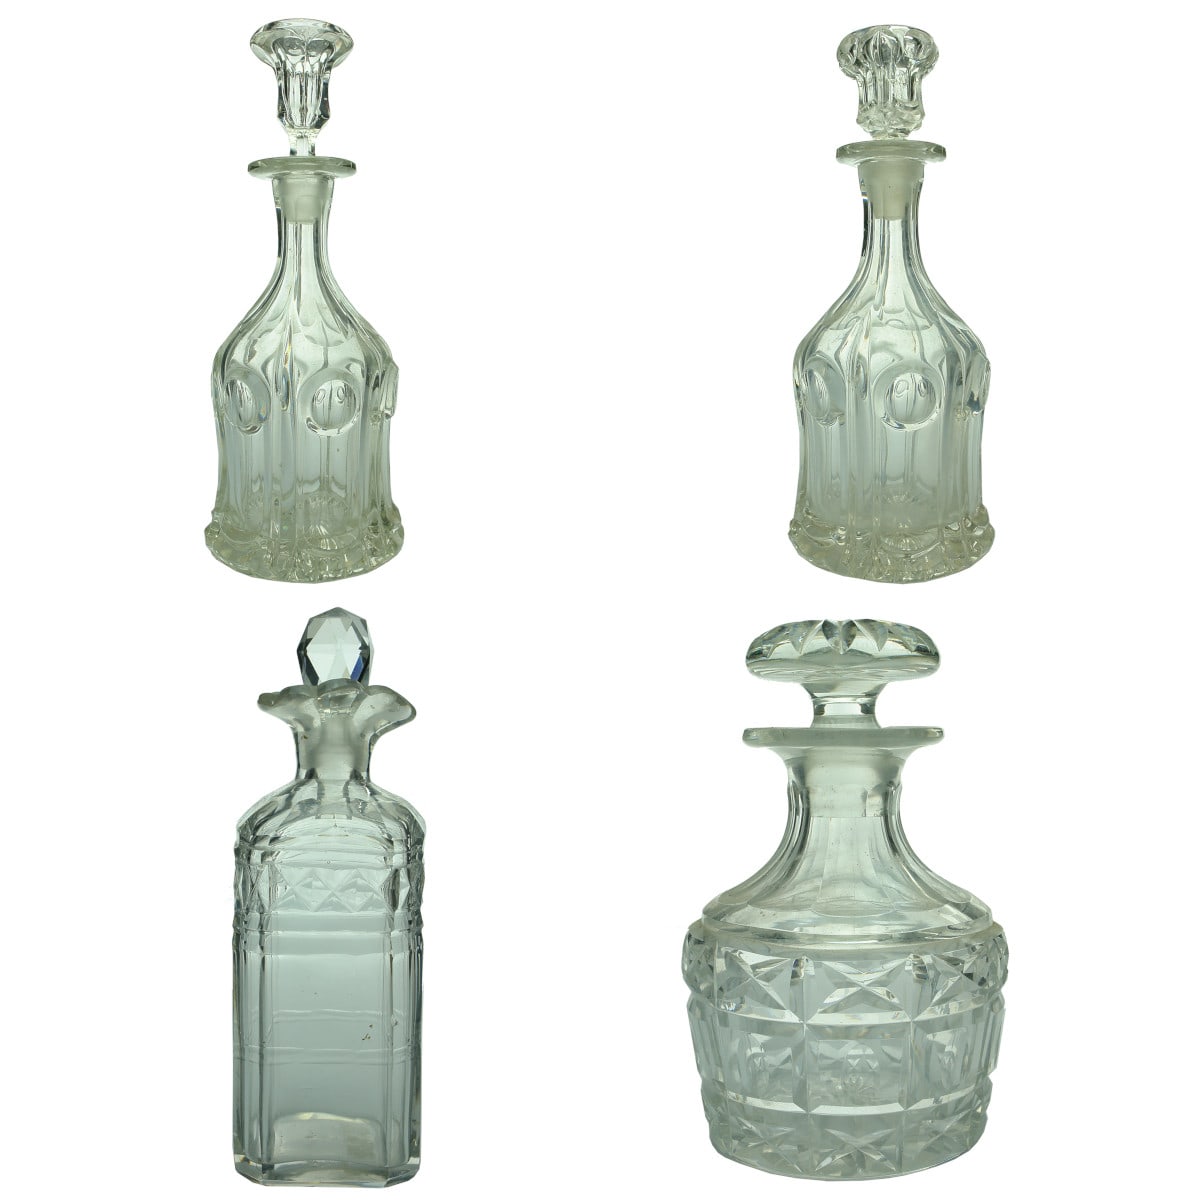 Four Lead Crystal Decanters.